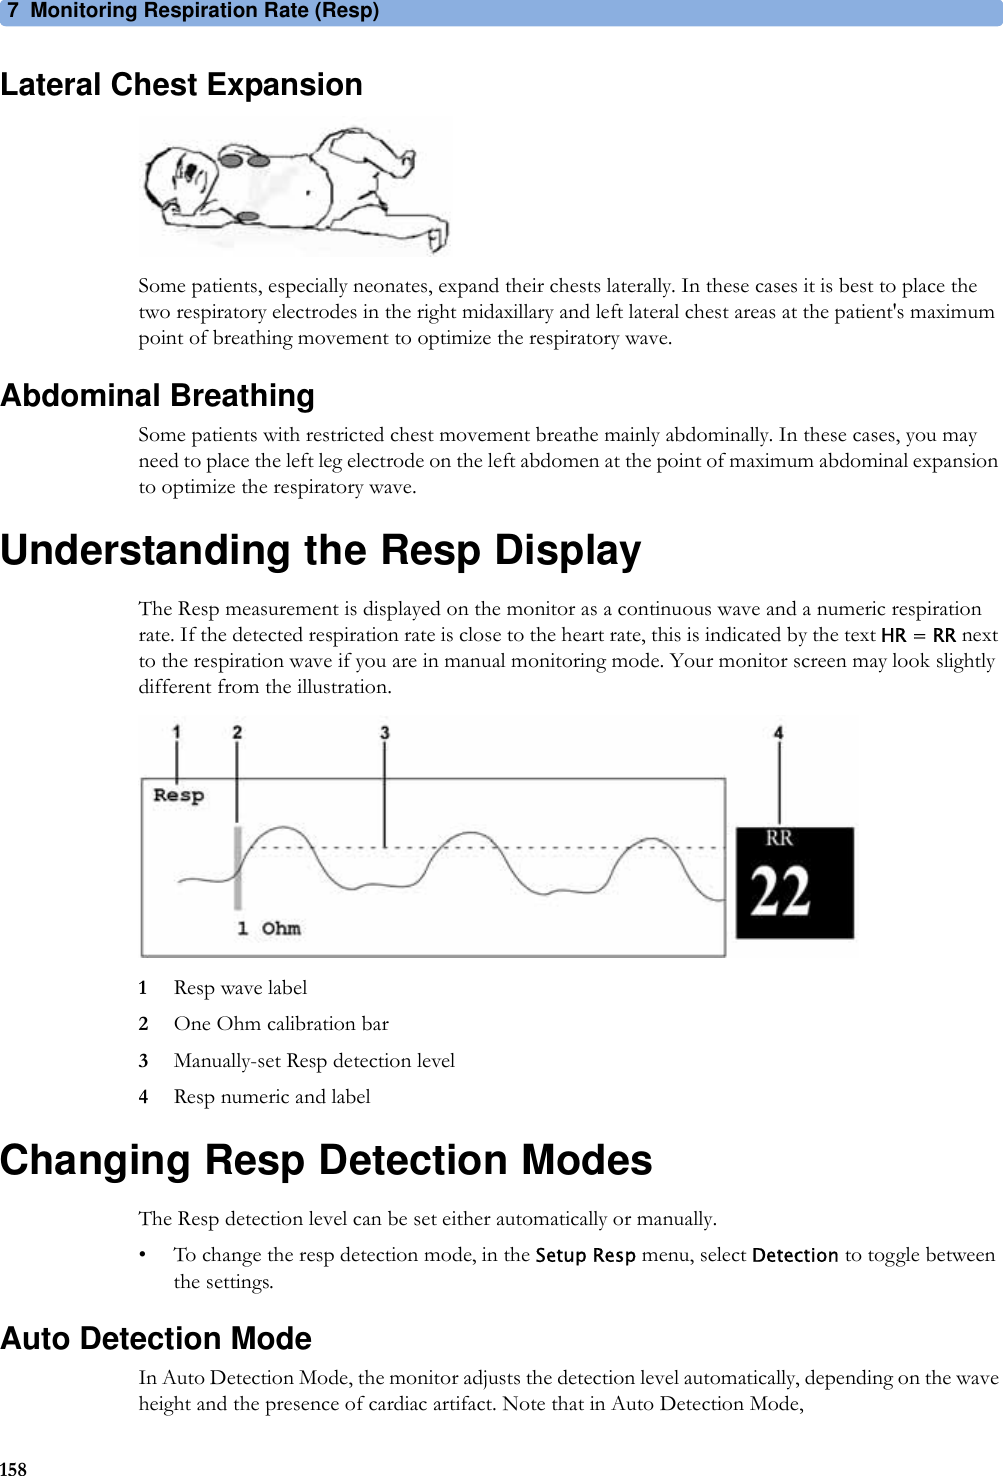 7 Monitoring Respiration Rate (Resp)158Lateral Chest ExpansionSome patients, especially neonates, expand their chests laterally. In these cases it is best to place the two respiratory electrodes in the right midaxillary and left lateral chest areas at the patient&apos;s maximum point of breathing movement to optimize the respiratory wave.Abdominal BreathingSome patients with restricted chest movement breathe mainly abdominally. In these cases, you may need to place the left leg electrode on the left abdomen at the point of maximum abdominal expansion to optimize the respiratory wave.Understanding the Resp DisplayThe Resp measurement is displayed on the monitor as a continuous wave and a numeric respiration rate. If the detected respiration rate is close to the heart rate, this is indicated by the text HR = RR next to the respiration wave if you are in manual monitoring mode. Your monitor screen may look slightly different from the illustration.1Resp wave label2One Ohm calibration bar3Manually-set Resp detection level4Resp numeric and labelChanging Resp Detection ModesThe Resp detection level can be set either automatically or manually.• To change the resp detection mode, in the Setup Resp menu, select Detection to toggle between the settings.Auto Detection ModeIn Auto Detection Mode, the monitor adjusts the detection level automatically, depending on the wave height and the presence of cardiac artifact. Note that in Auto Detection Mode,